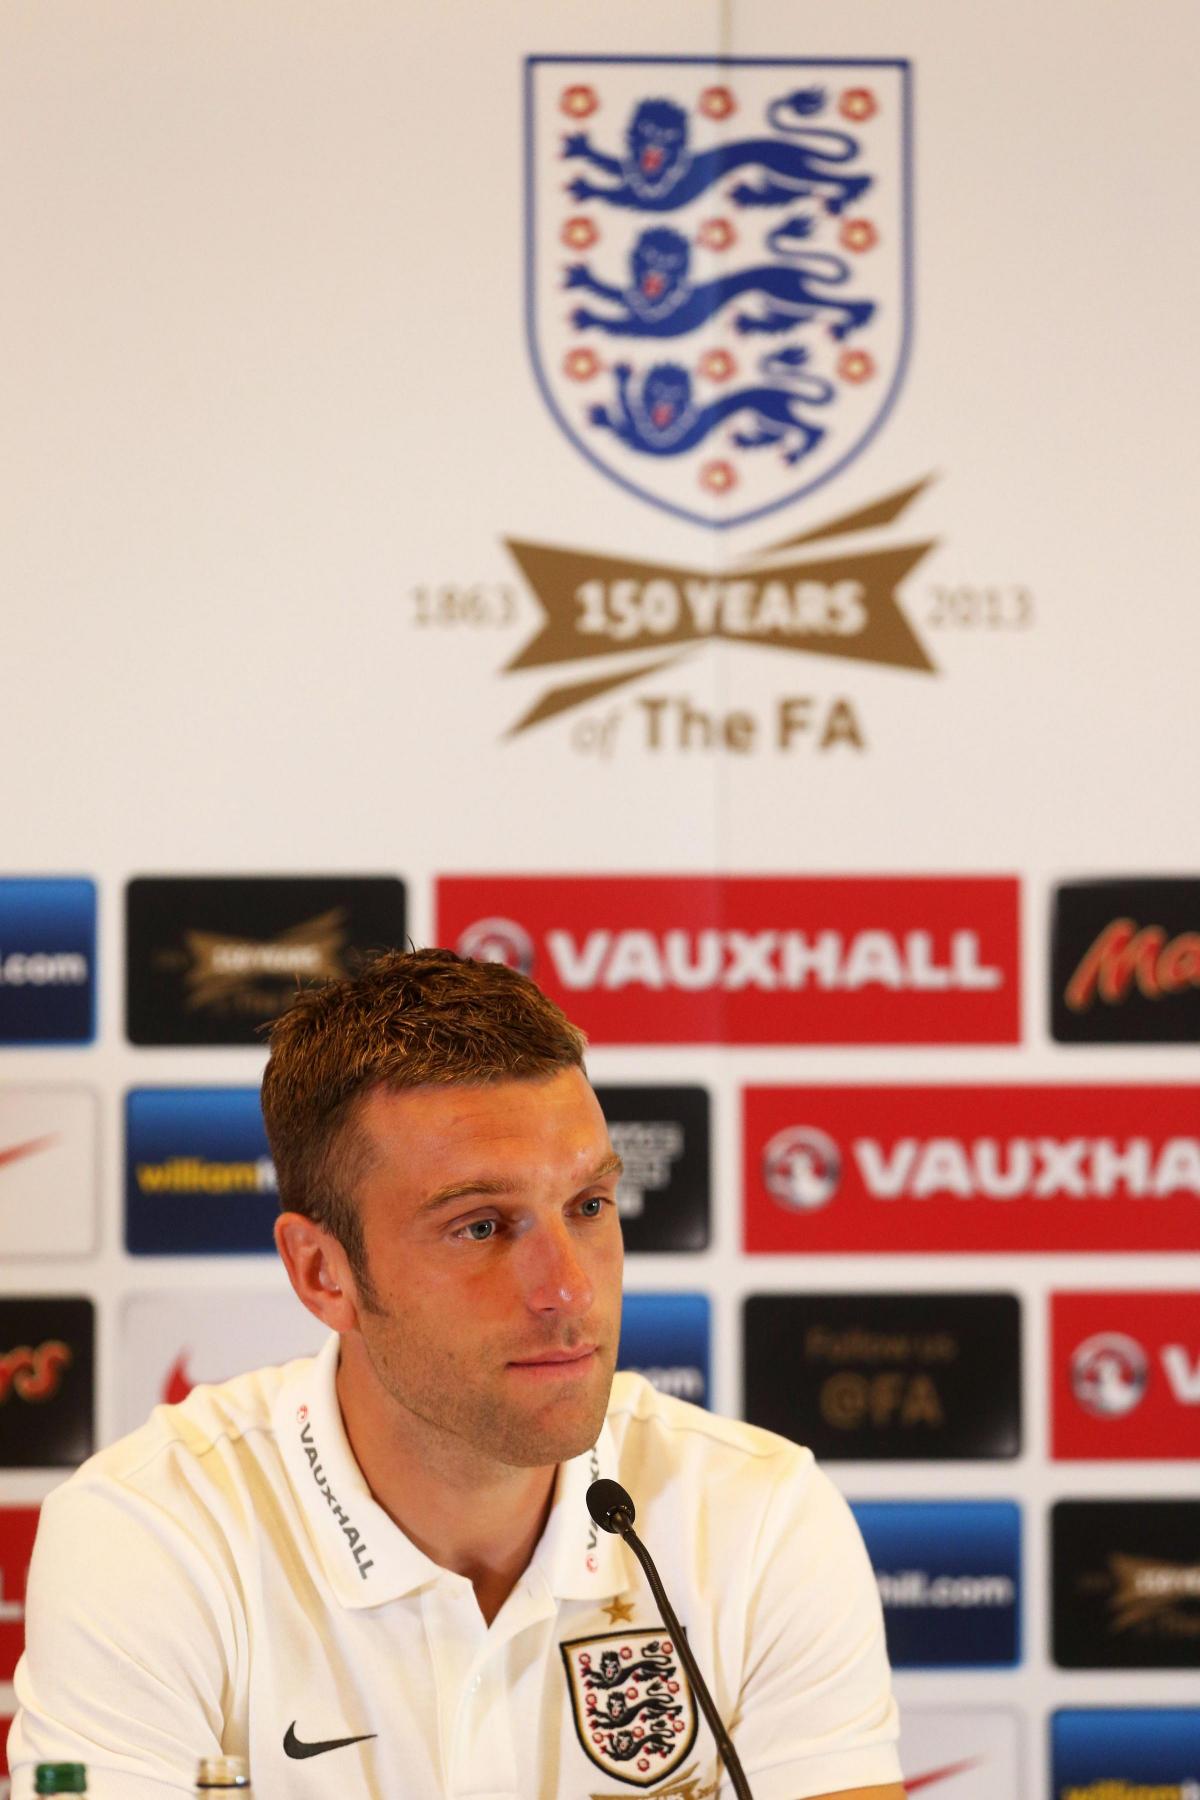 Rickie Lambert faces the press for the first time as an England player